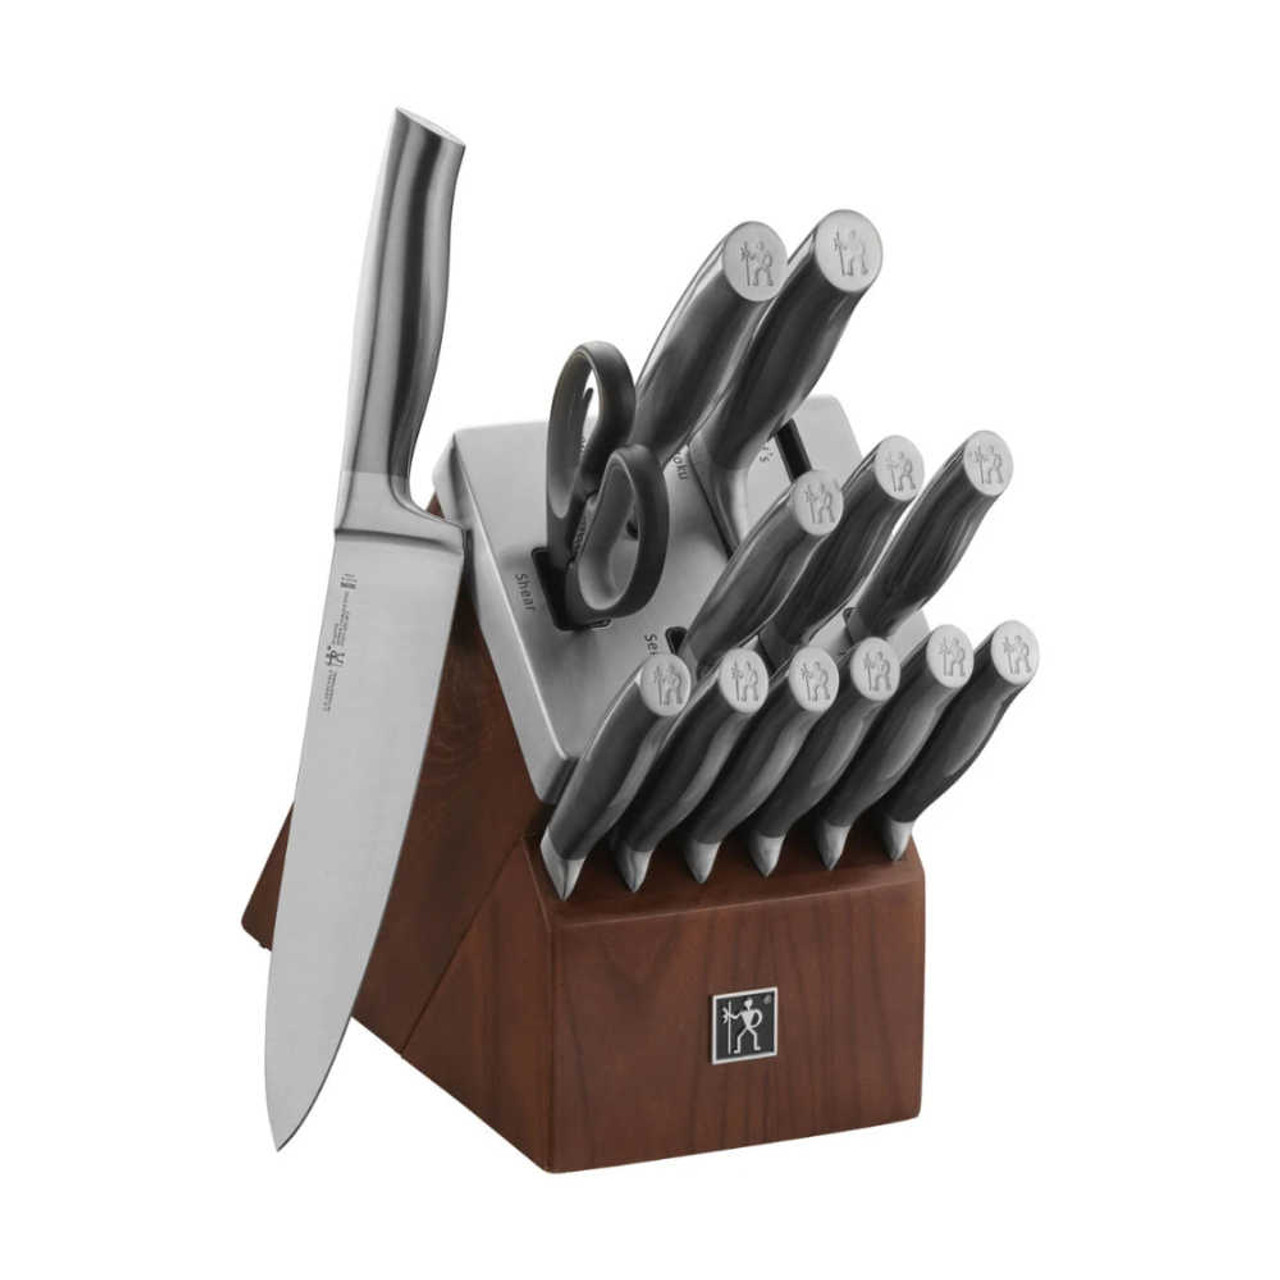 https://cdn11.bigcommerce.com/s-hccytny0od/images/stencil/1280x1280/products/5183/22378/Henckels_Graphite_14-Piece_Self-Sharpening_Knife_Block_Set_1__95530.1669148795.jpg?c=2?imbypass=on